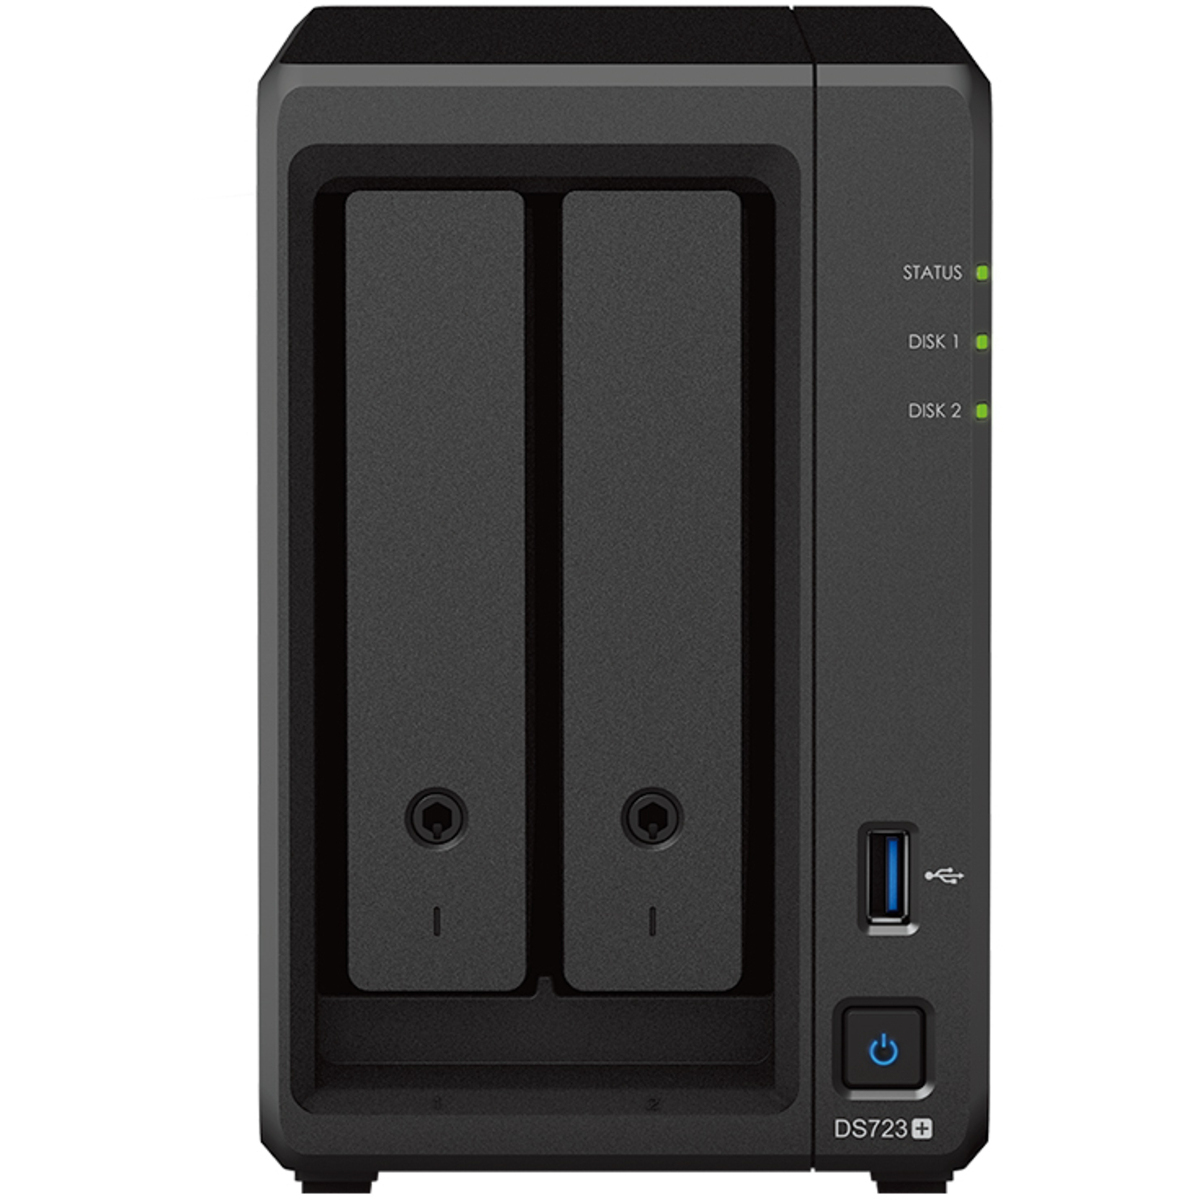 buy $701 Synology DiskStation DS723+ 2tb Desktop NAS - Network Attached Storage Device 2x1000gb Samsung 870 QVO MZ-77Q1T0 2.5 560/530MB/s SATA 6Gb/s SSD CONSUMER Class Drives Installed - Burn-In Tested - nas headquarters buy network attached storage server device das new raid-5 free shipping usa DiskStation DS723+